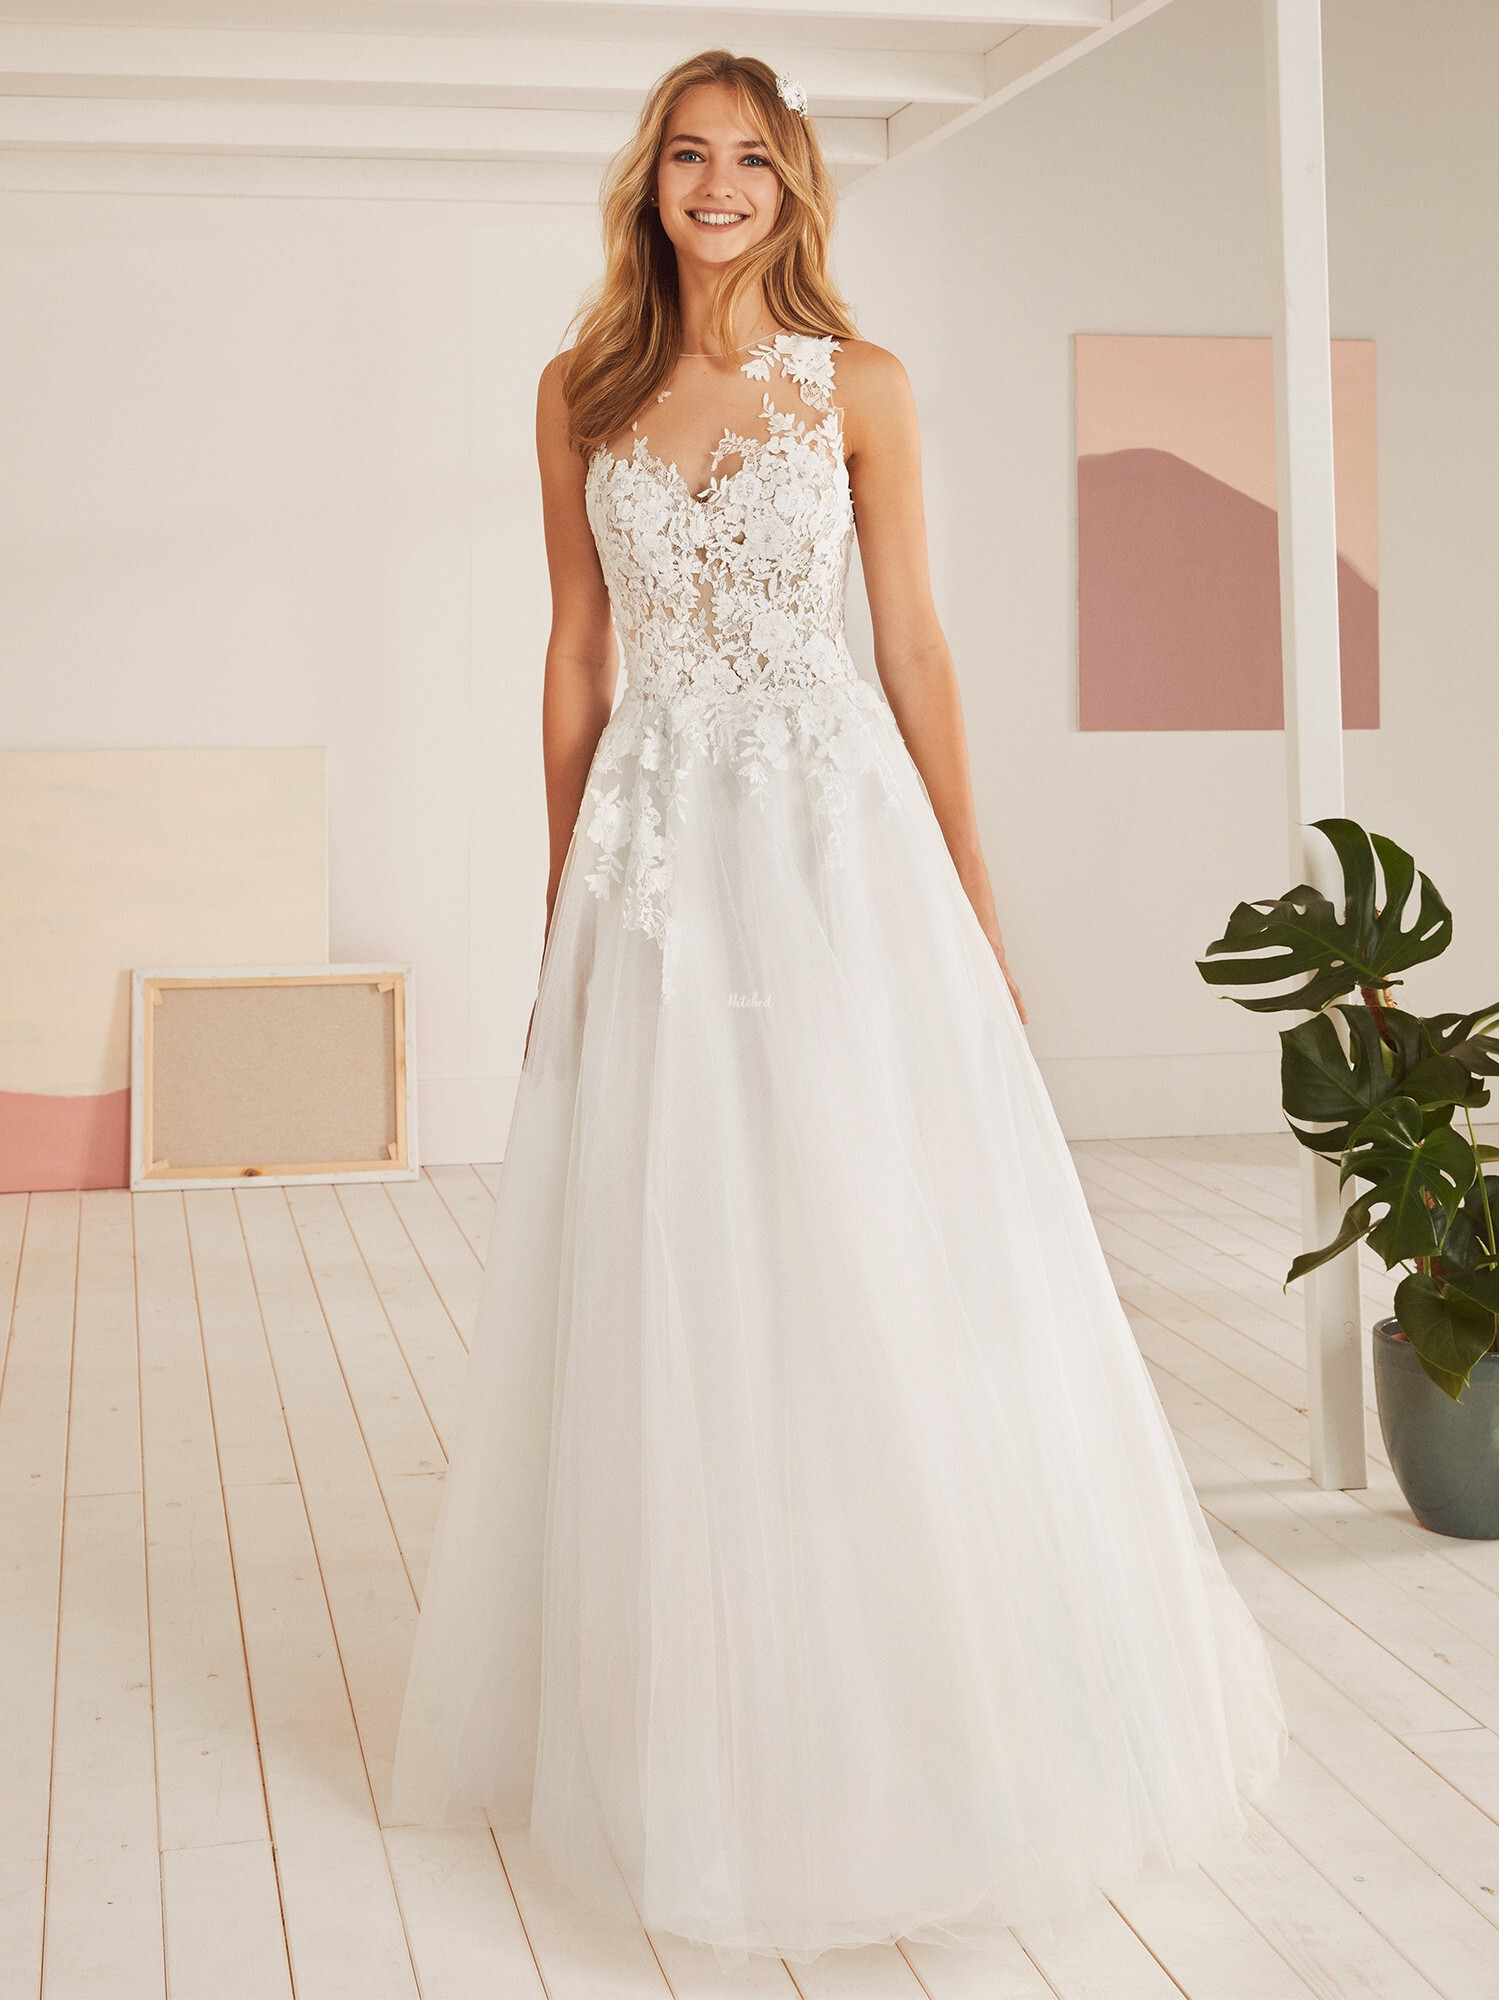 ORLEANS Wedding Dress from White One - hitched.co.uk